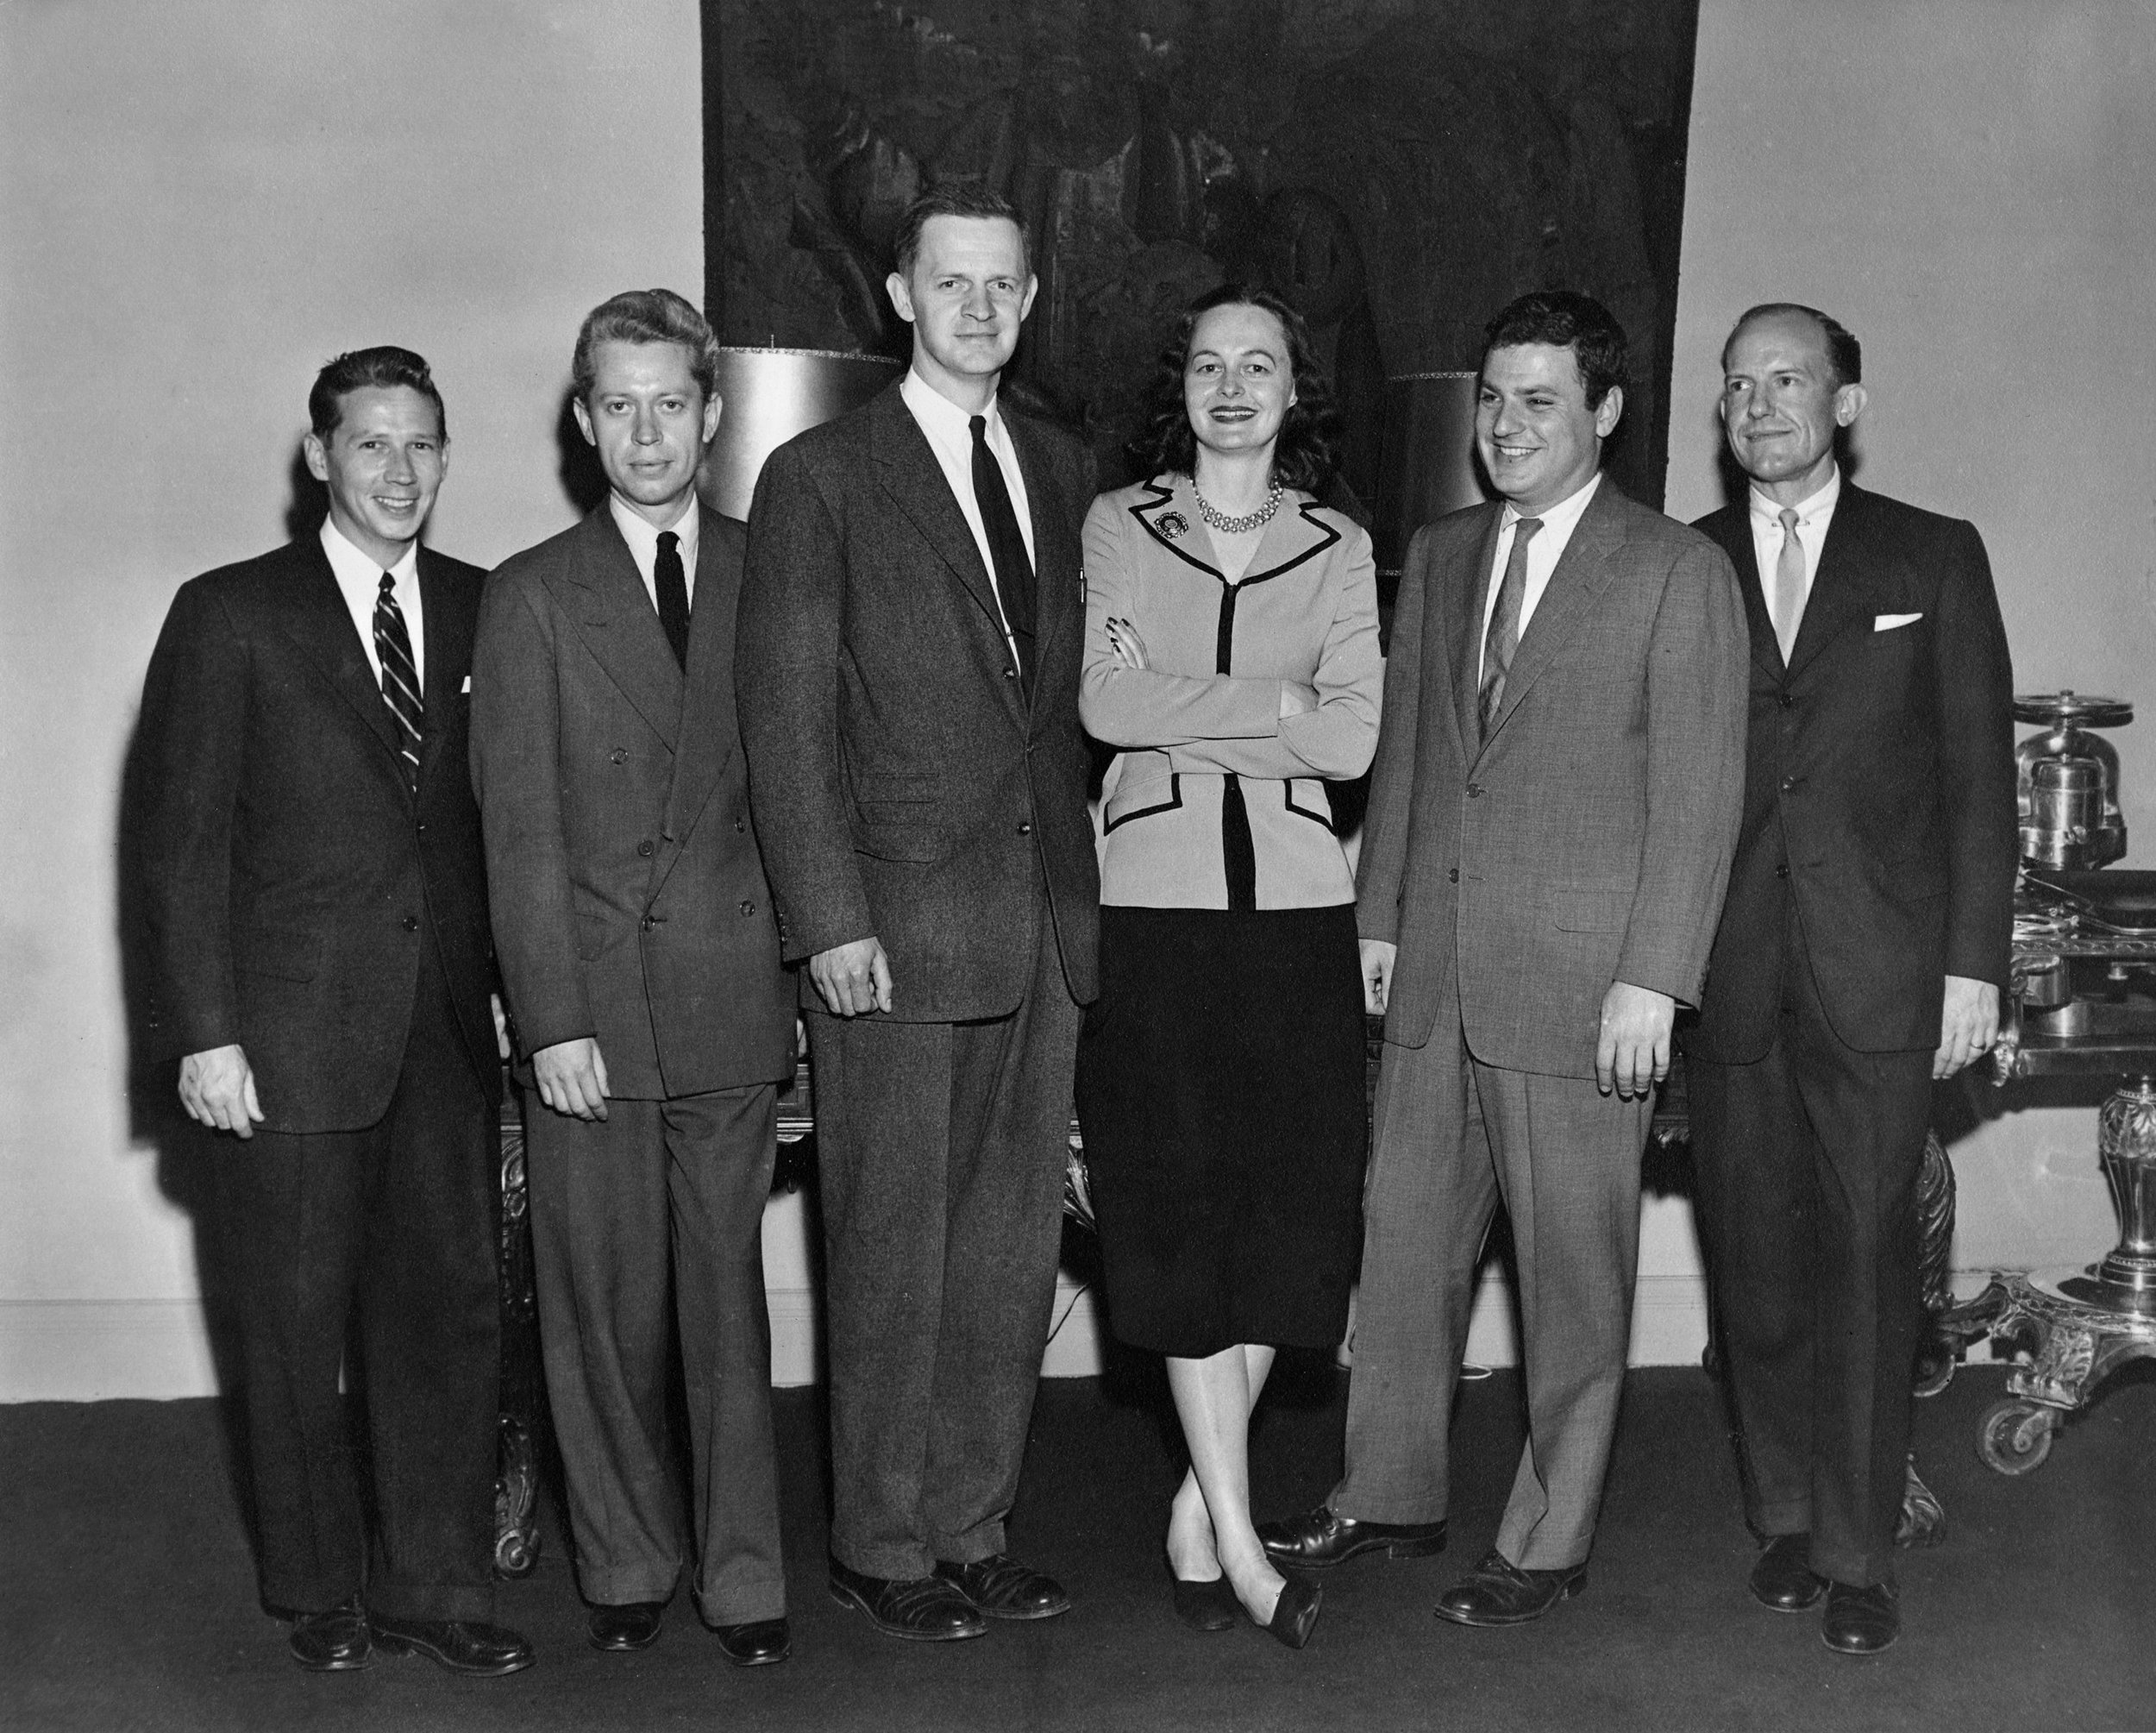 nysid-faculty-and-administration-including-alexander-breckenridge-2nd-from-left-sheila-chapline-3rd-from-right-and-gilbert-werle-far-right-ca-1955_24118491769_o.jpg